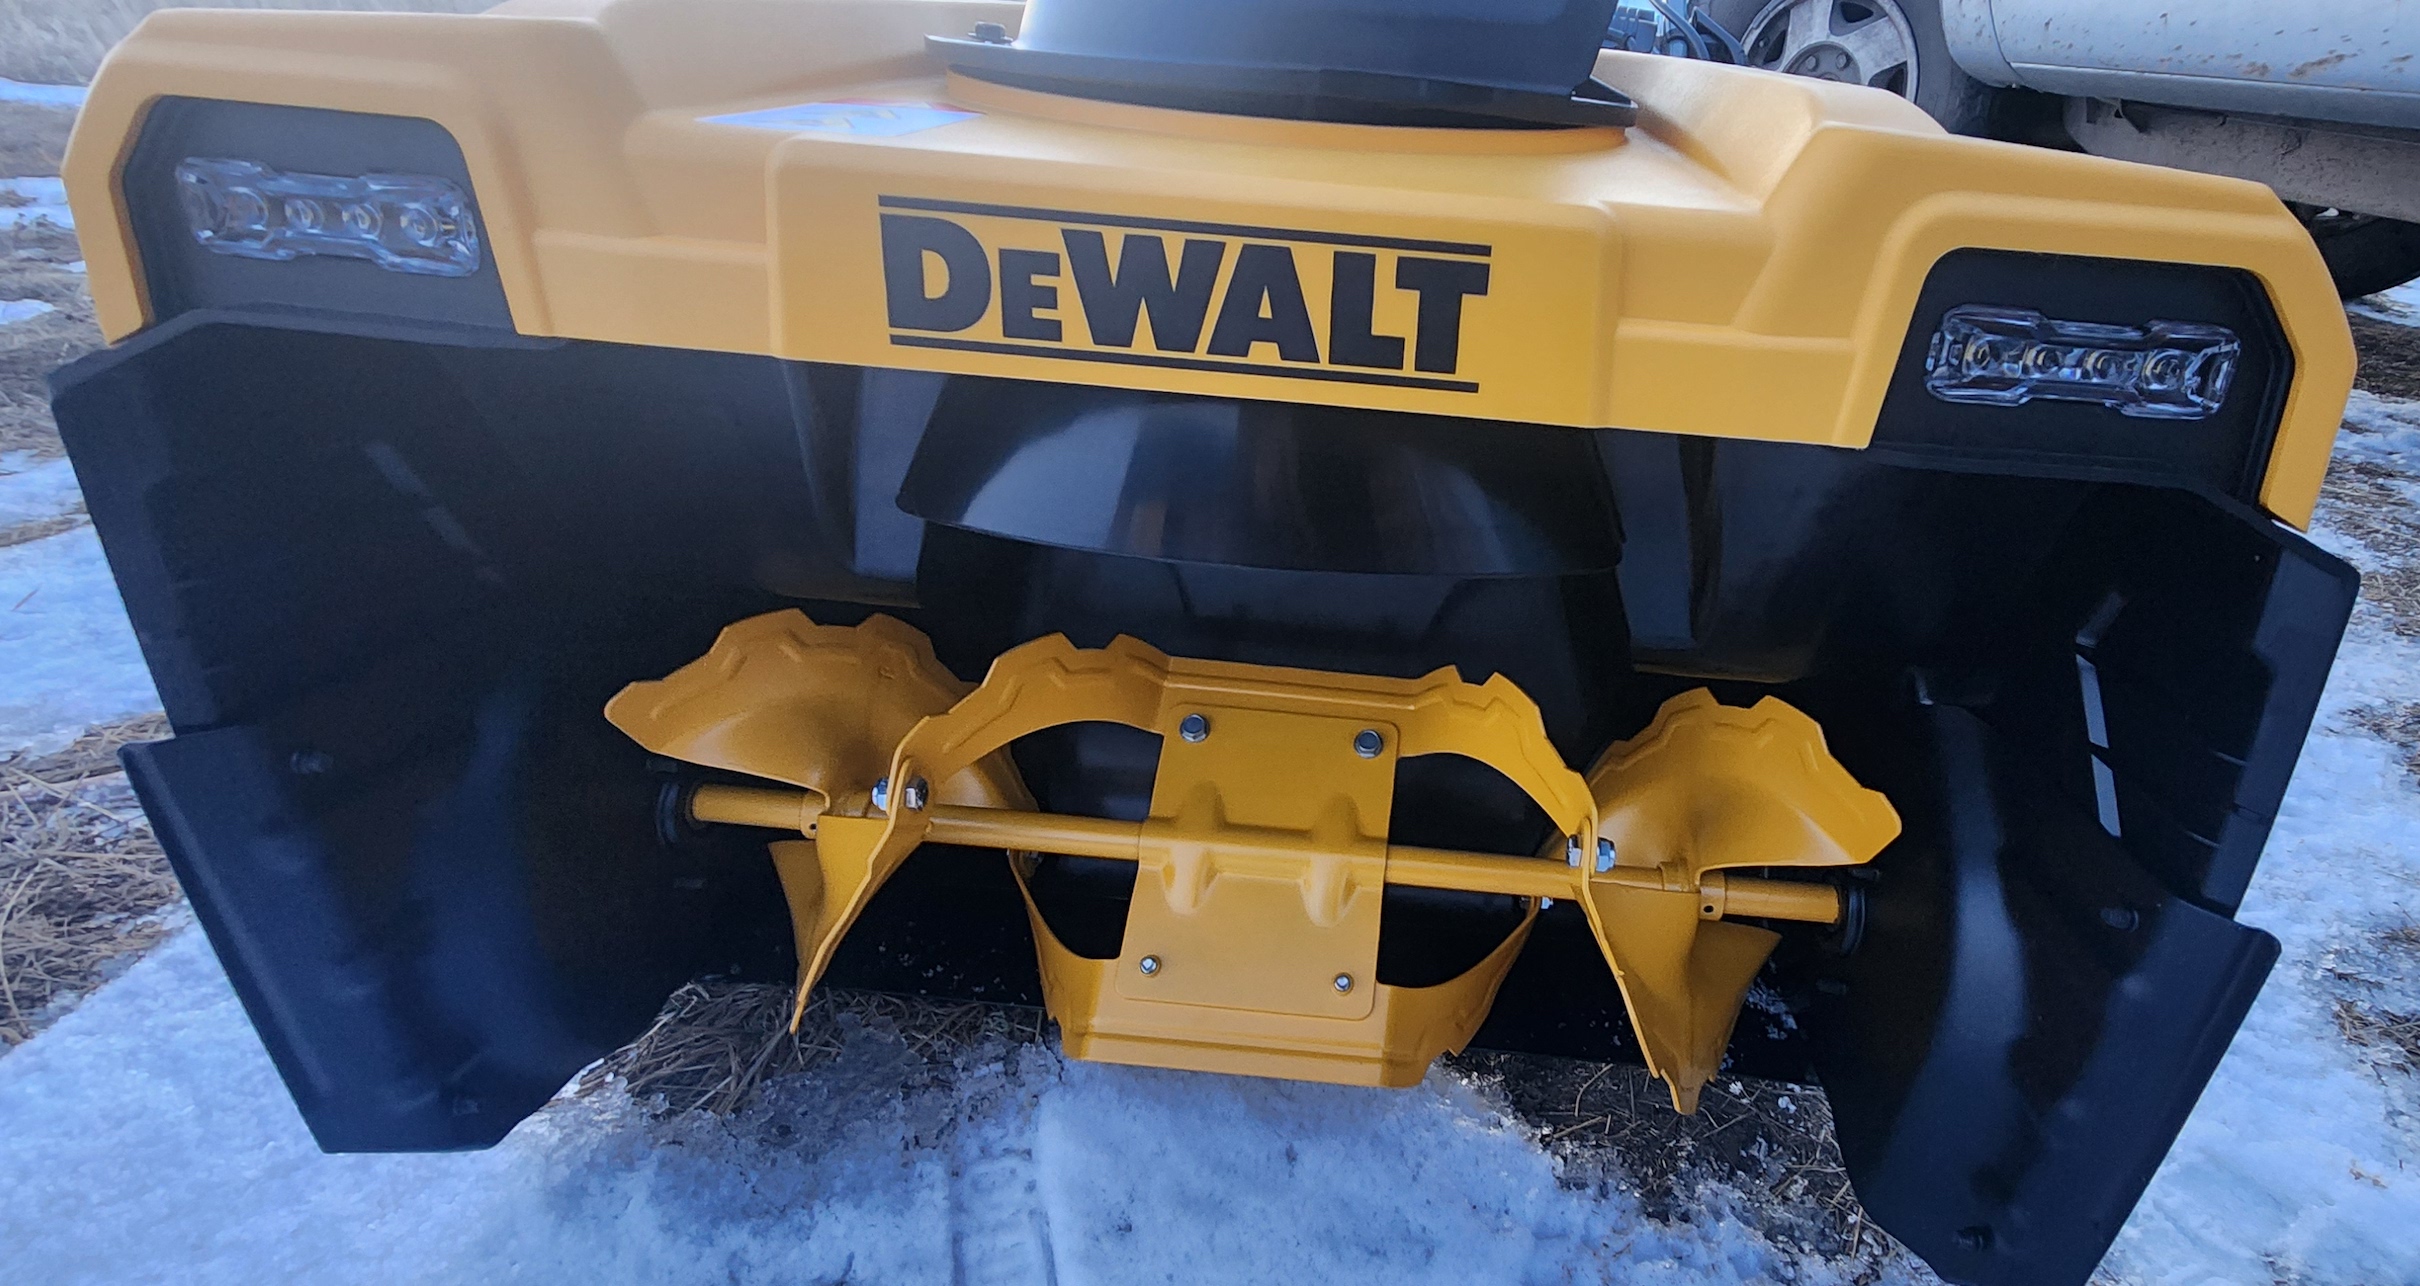 Dewalt snow blower positioned outside on a cleared driveway